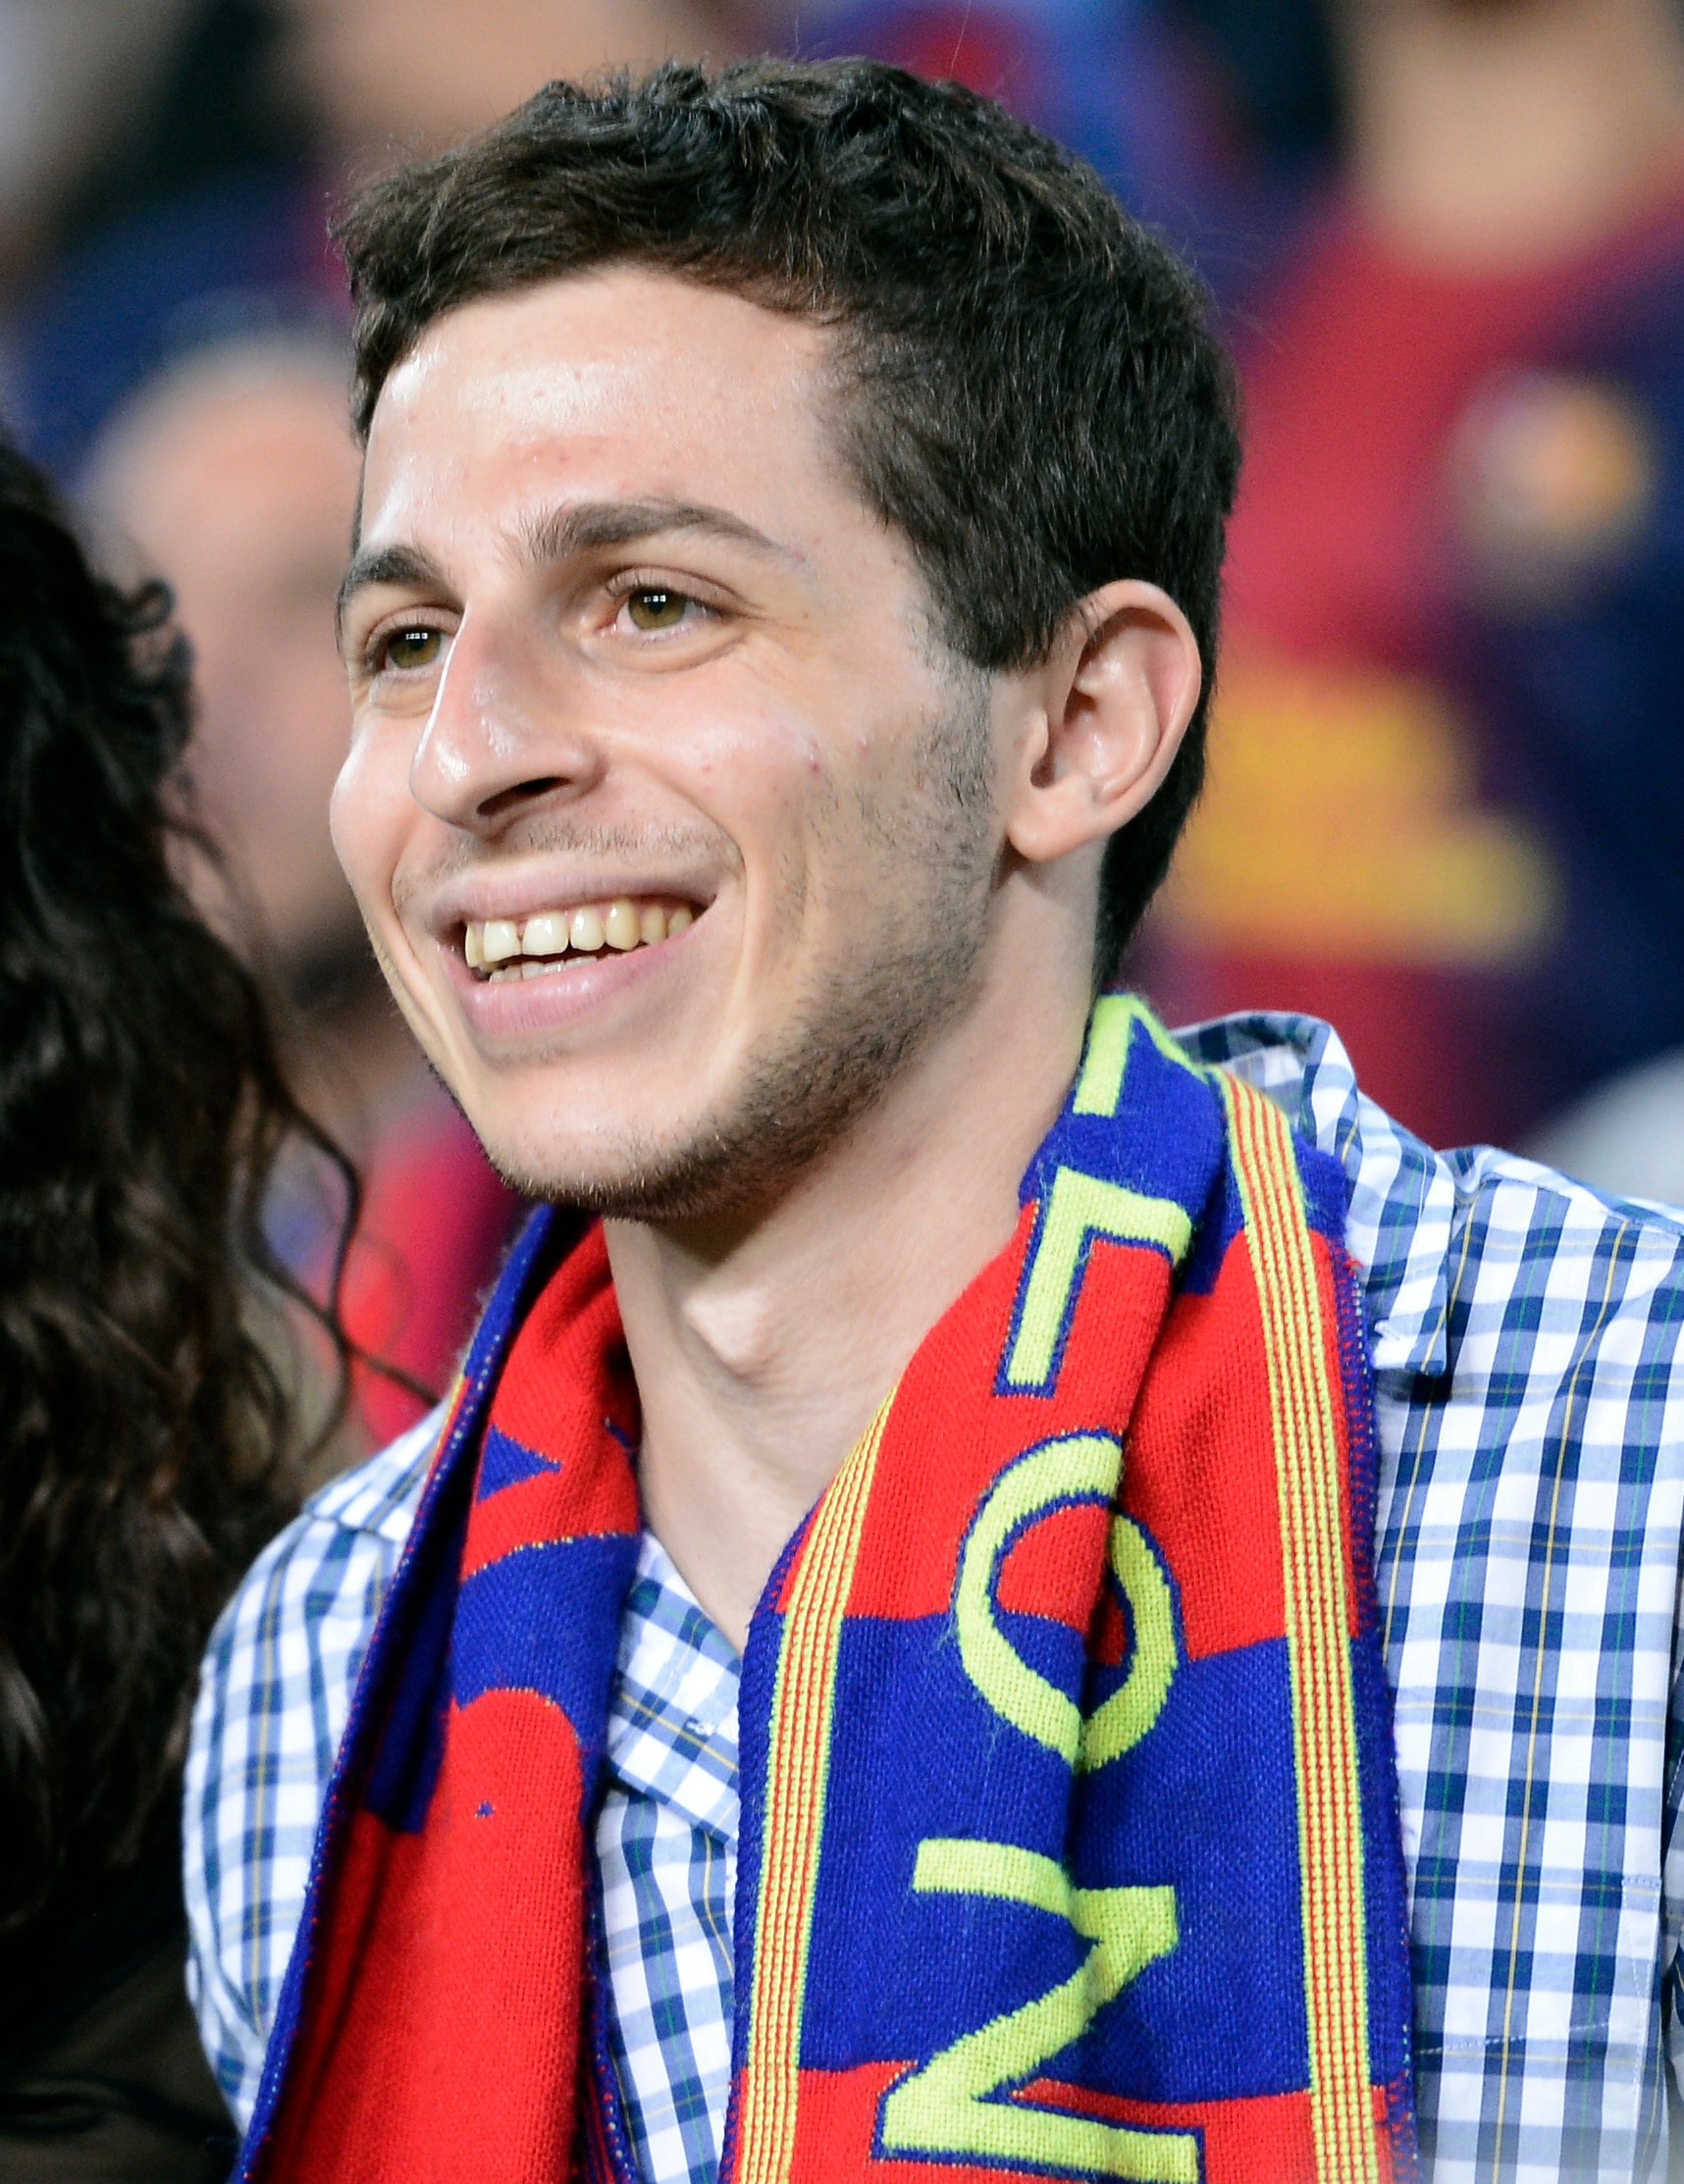 Man wearing blue and red checked scarf smiles 